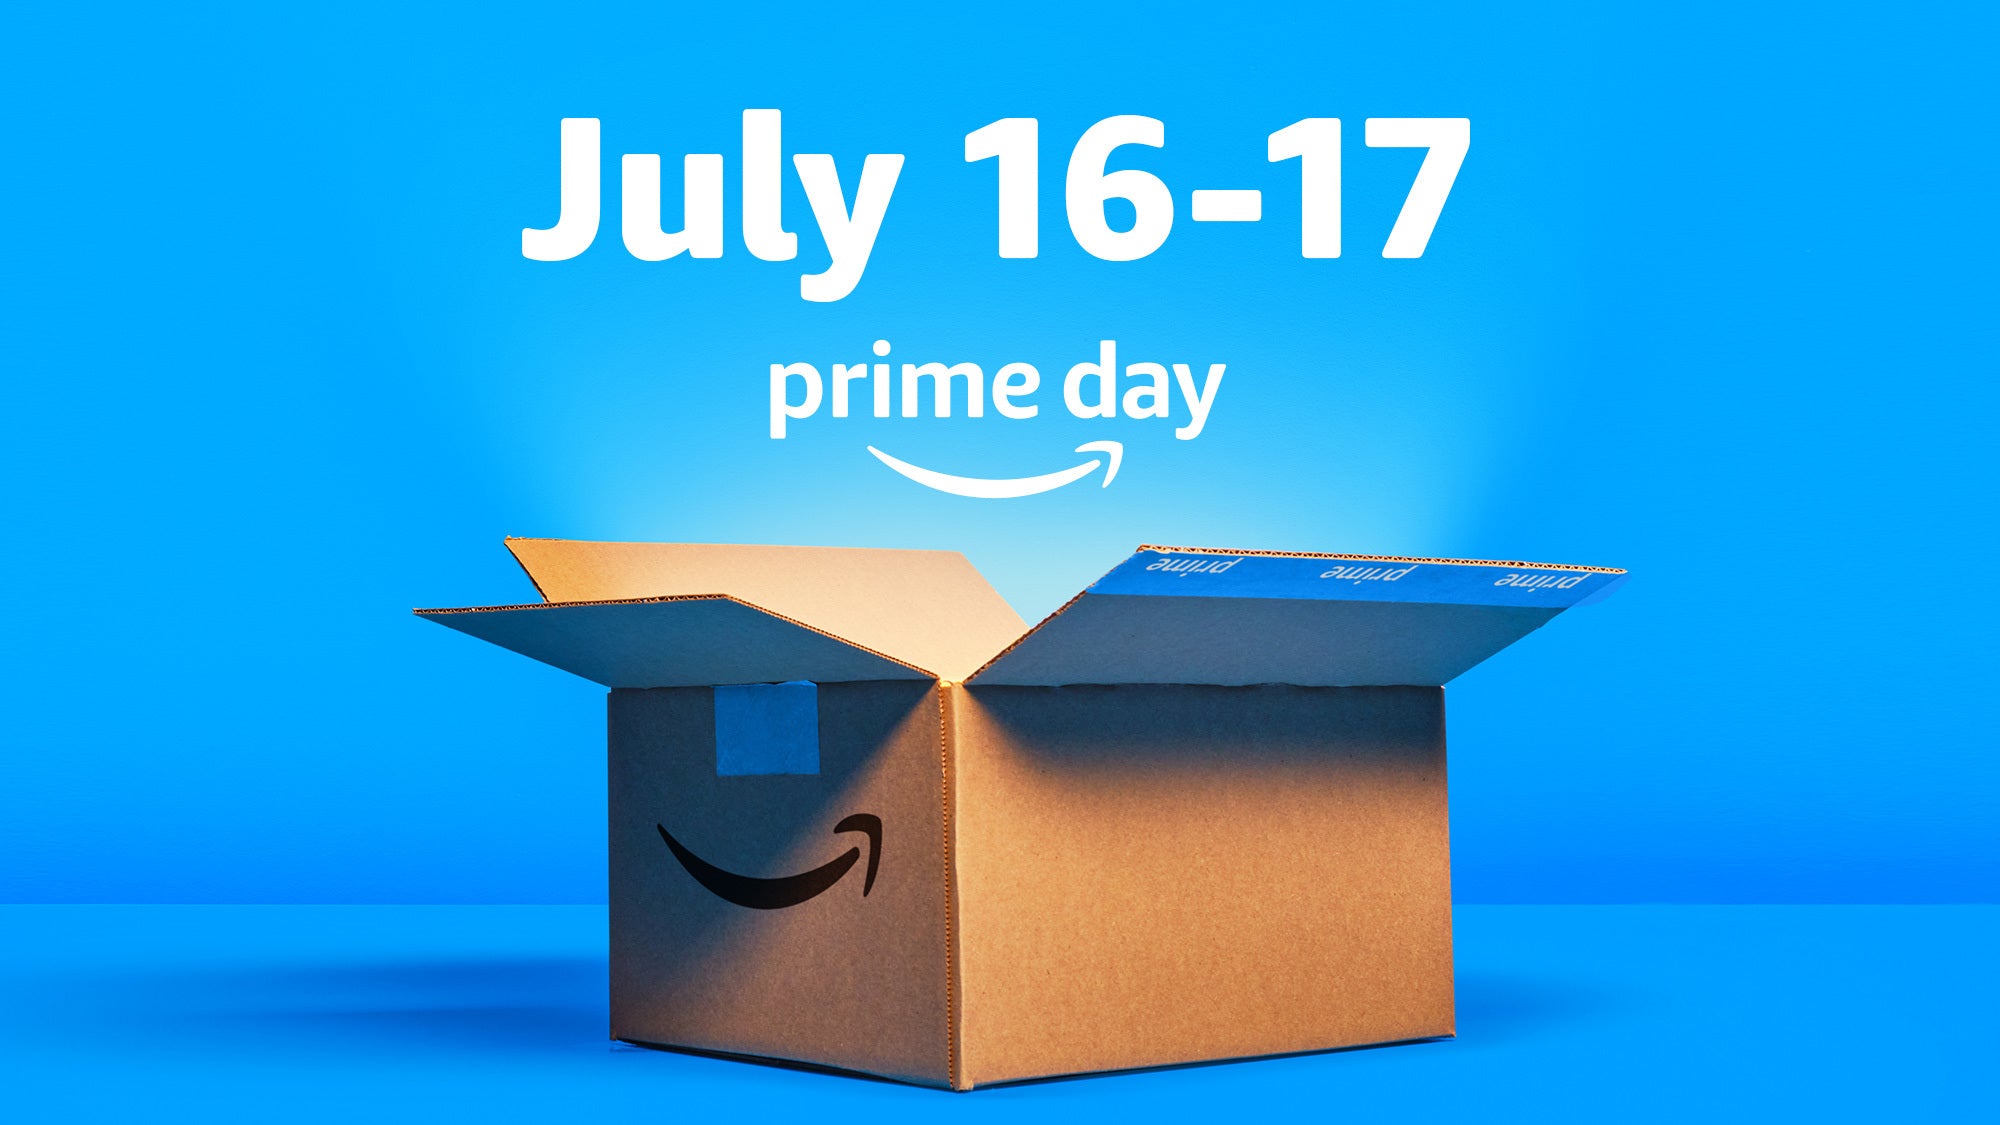 Prime Day Deals Go Live In The Morning!